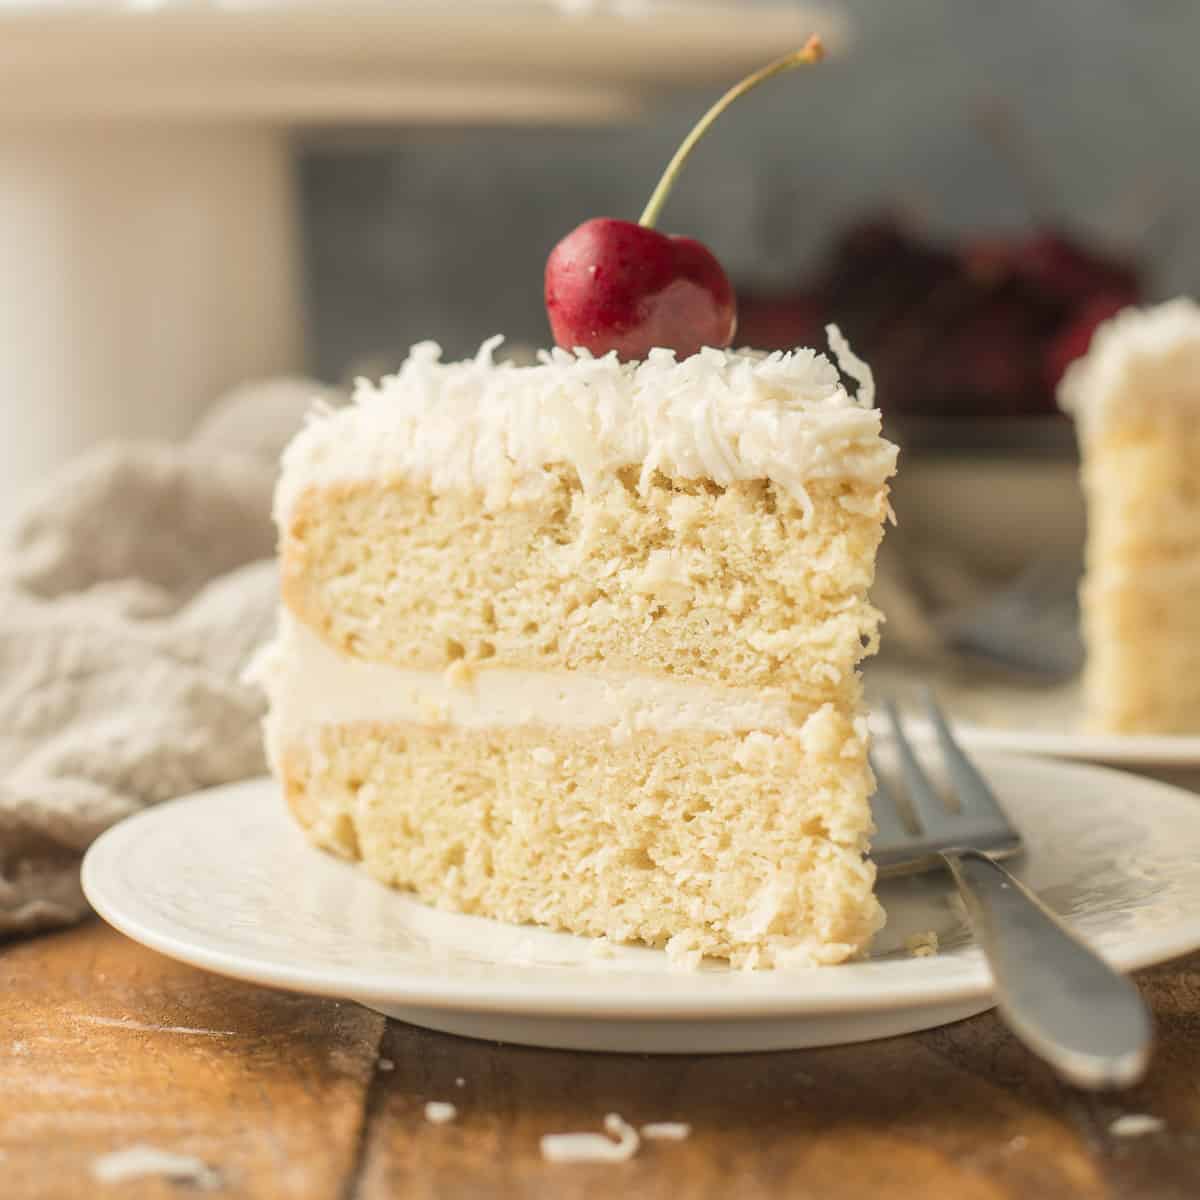 Slice of Vegan Coconut Cake on a Plate with a Cherry on Top